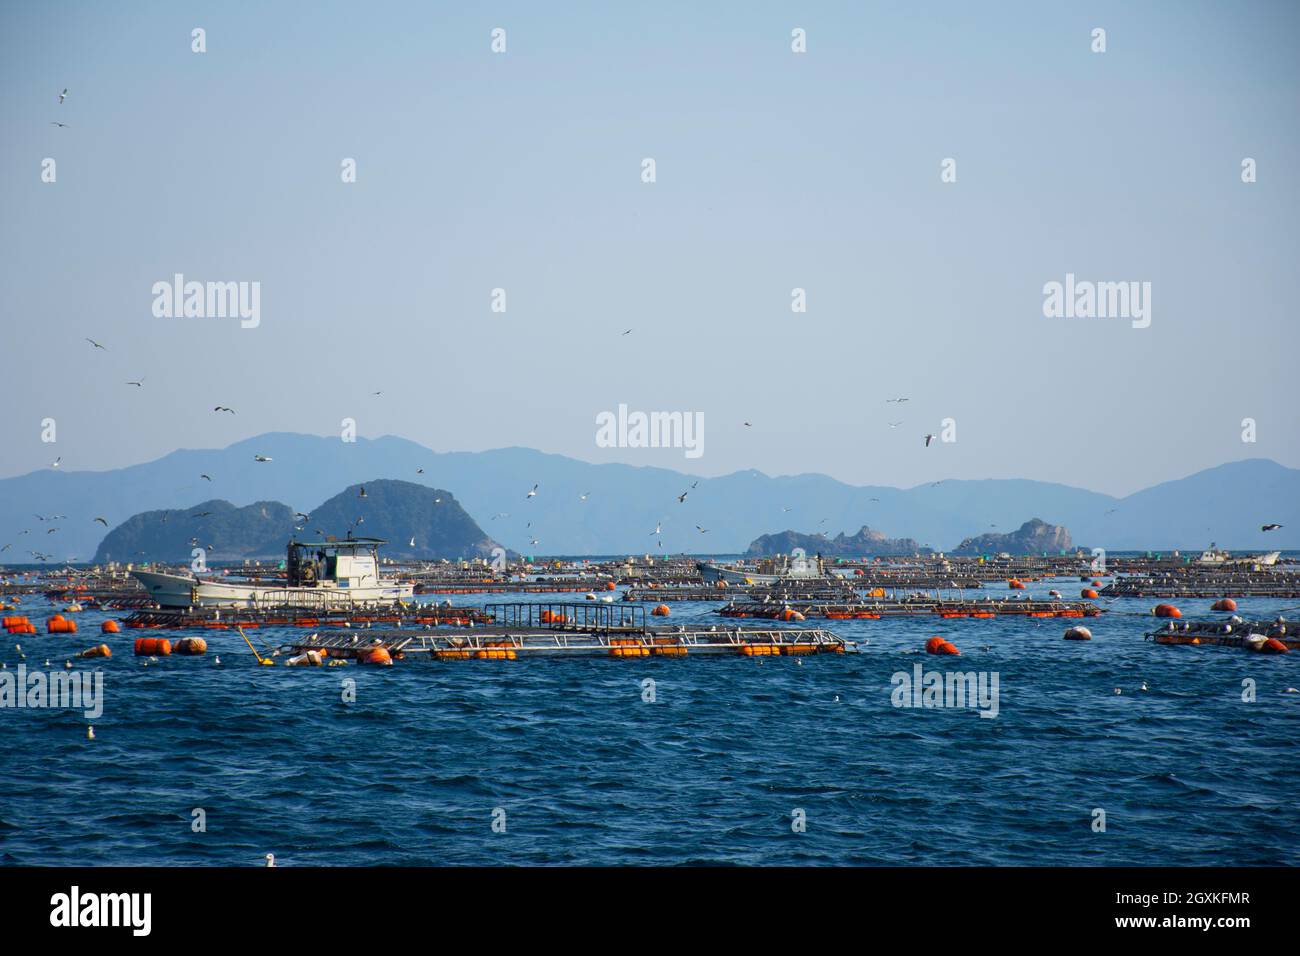 Aquaculture pans for red seabream, Pagrus major, Ainan, Japan Stock Photo